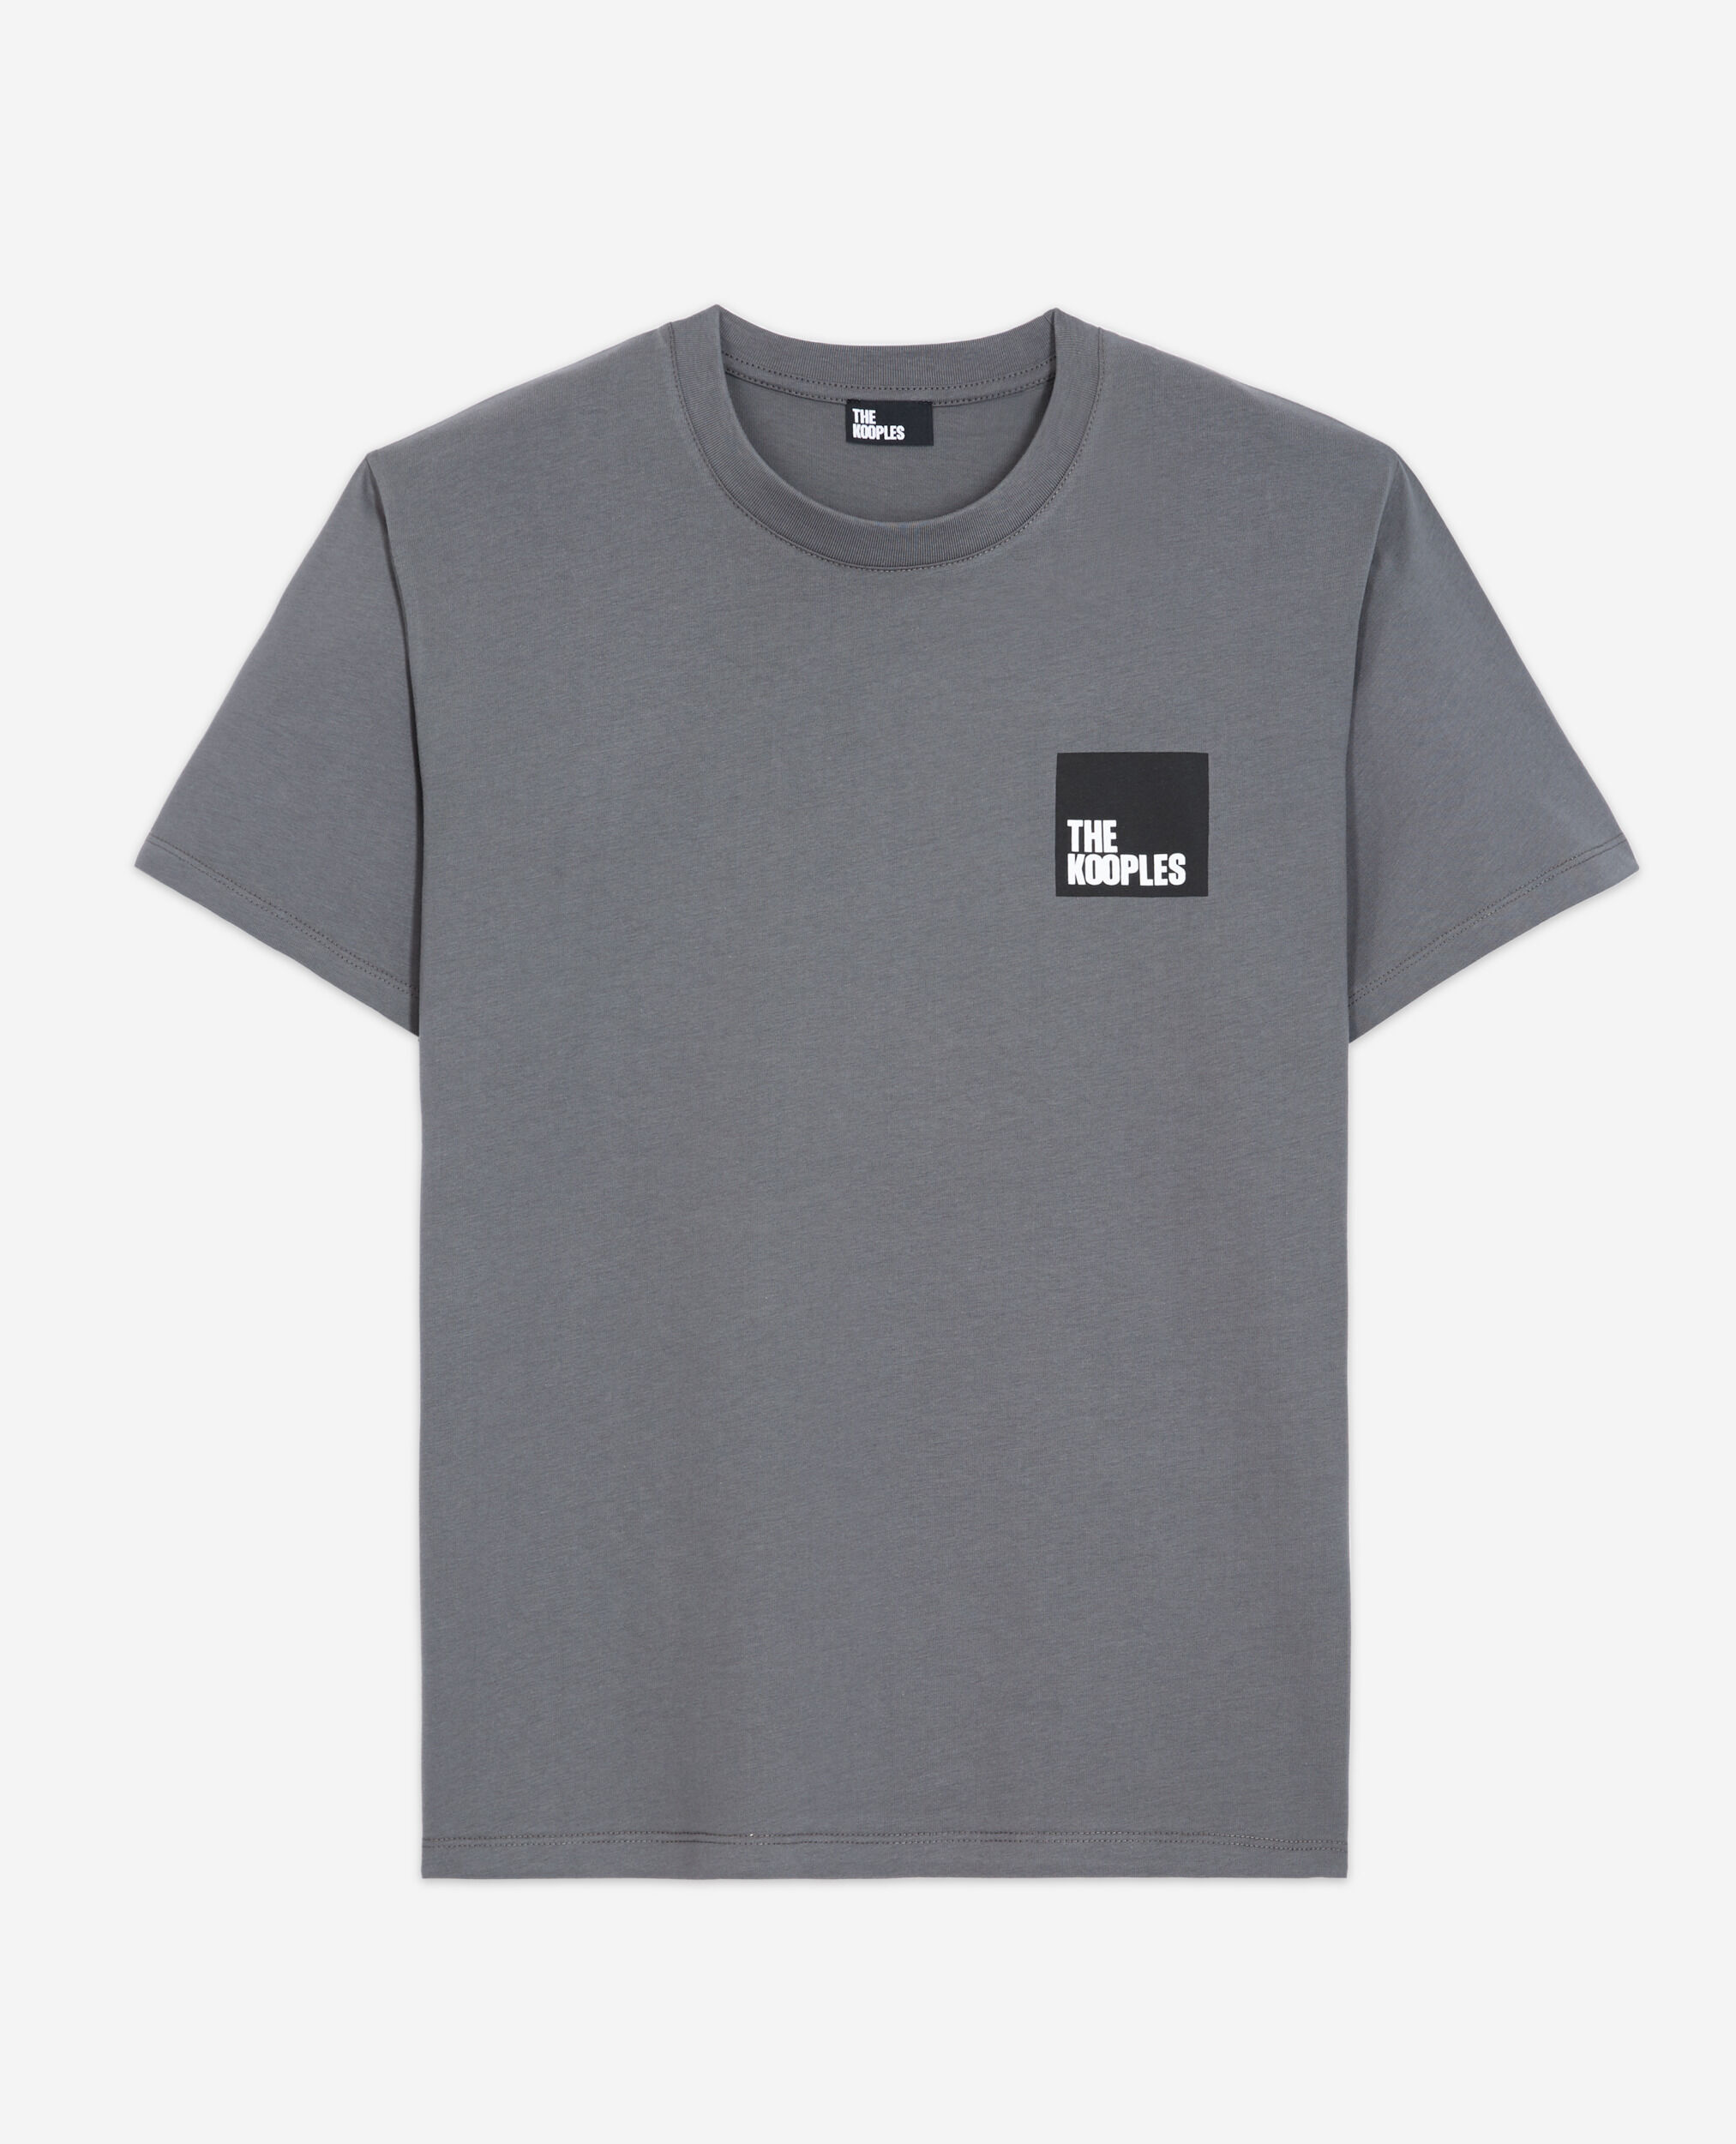 Gray T-shirt, ANTHRACITE, hi-res image number null